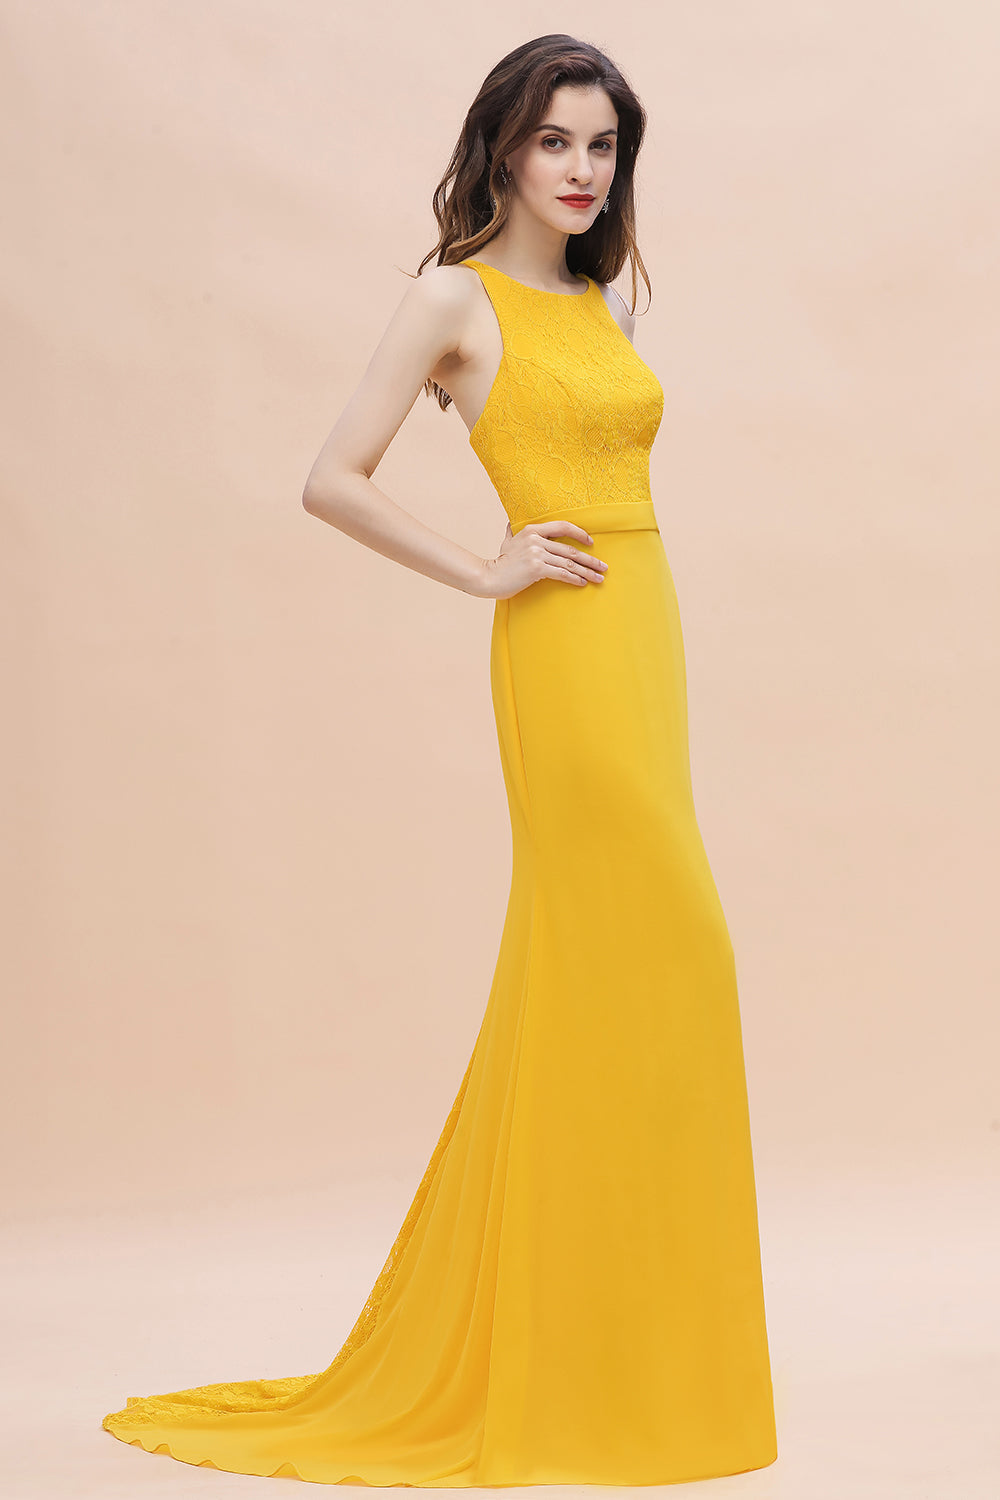 Load image into Gallery viewer, Long Mermaid Backless Bridesmaid Dress Chic Yellow Wedding Guest Dress-BIZTUNNEL
